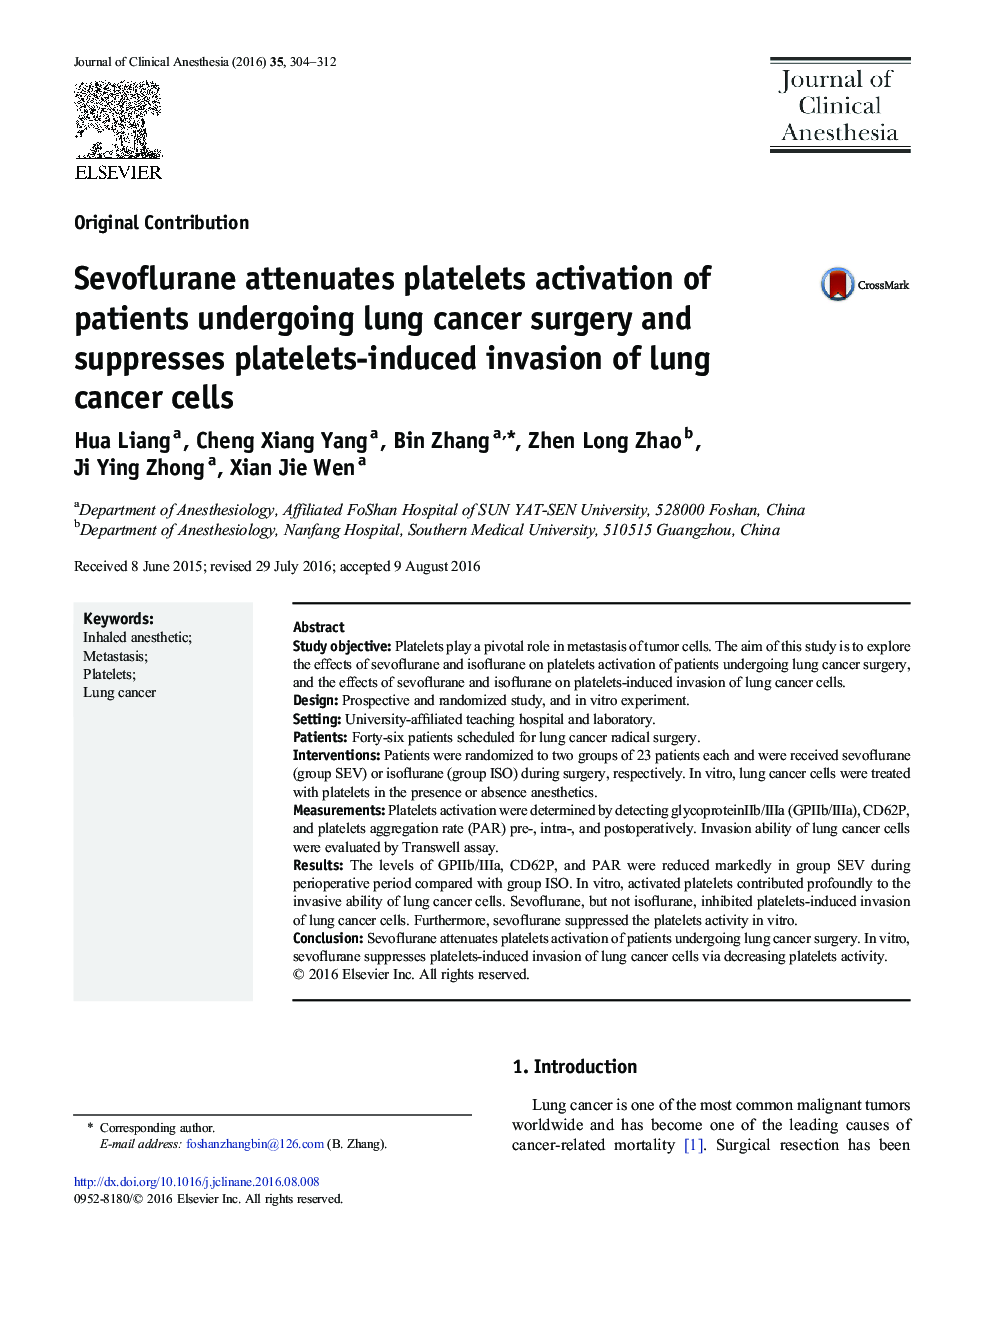 Sevoflurane attenuates platelets activation of patients undergoing lung cancer surgery and suppresses platelets-induced invasion of lung cancer cells